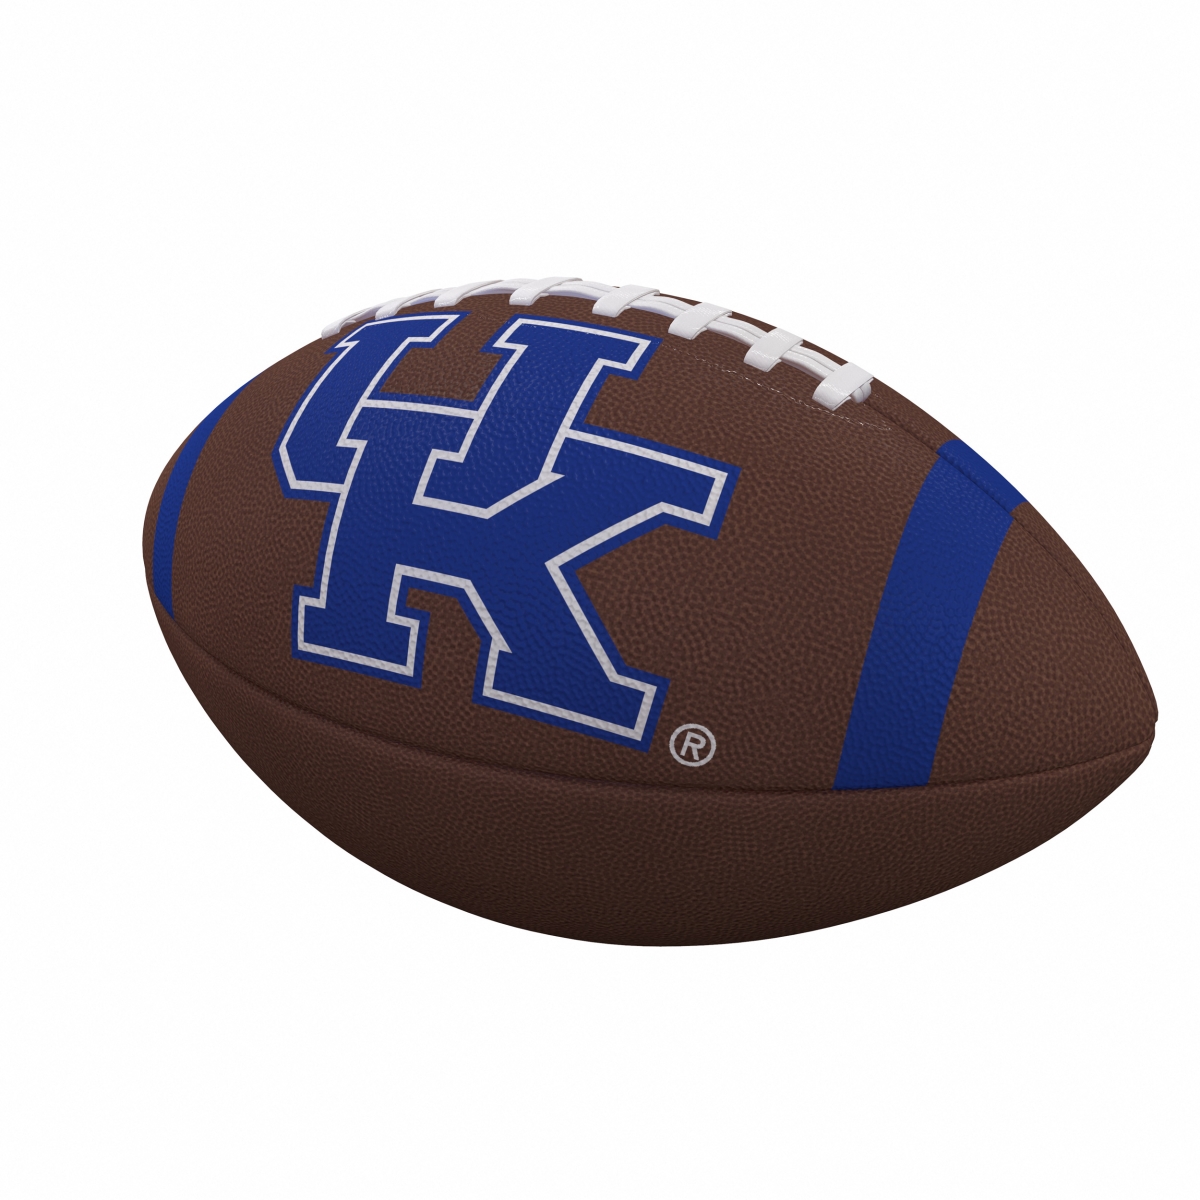 Picture of Logo Brands 159-93FC-1 Kentucky Team Stripe Full-Size Composite Football